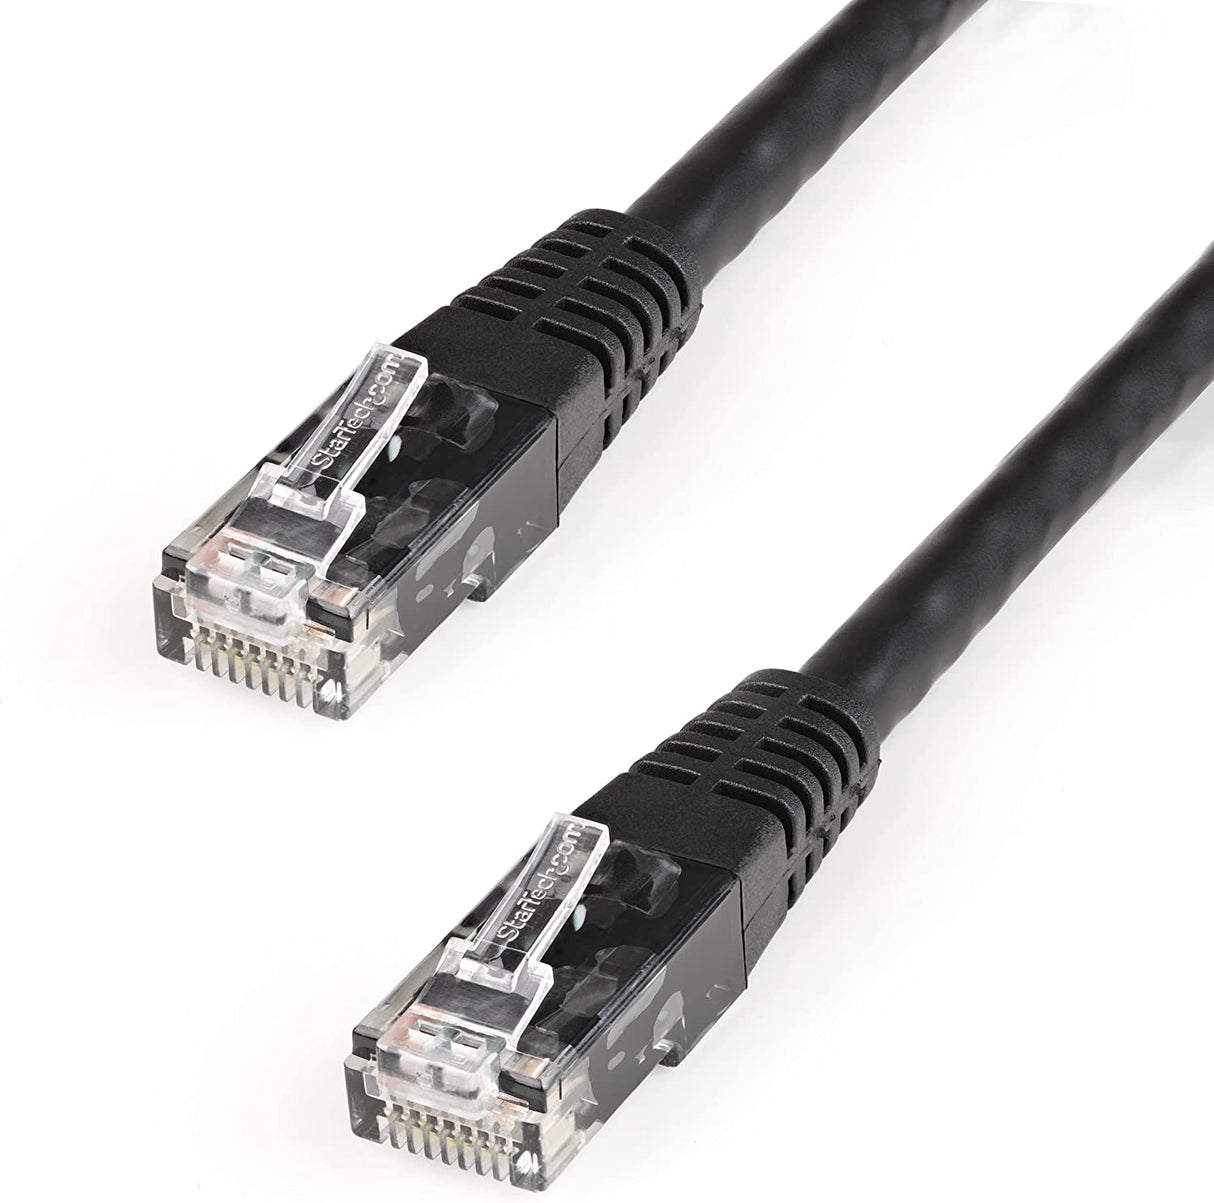 StarTech.com 6ft CAT6 Ethernet Cable - Black CAT 6 Gigabit Ethernet Wire -650MHz 100W PoE++ RJ45 UTP Molded Category 6 Network/Patch Cord w/Strain Relief/Fluke Tested UL/TIA Certified (C6PATCH6BK) Black 6 ft / 1.82 m 1 Pack